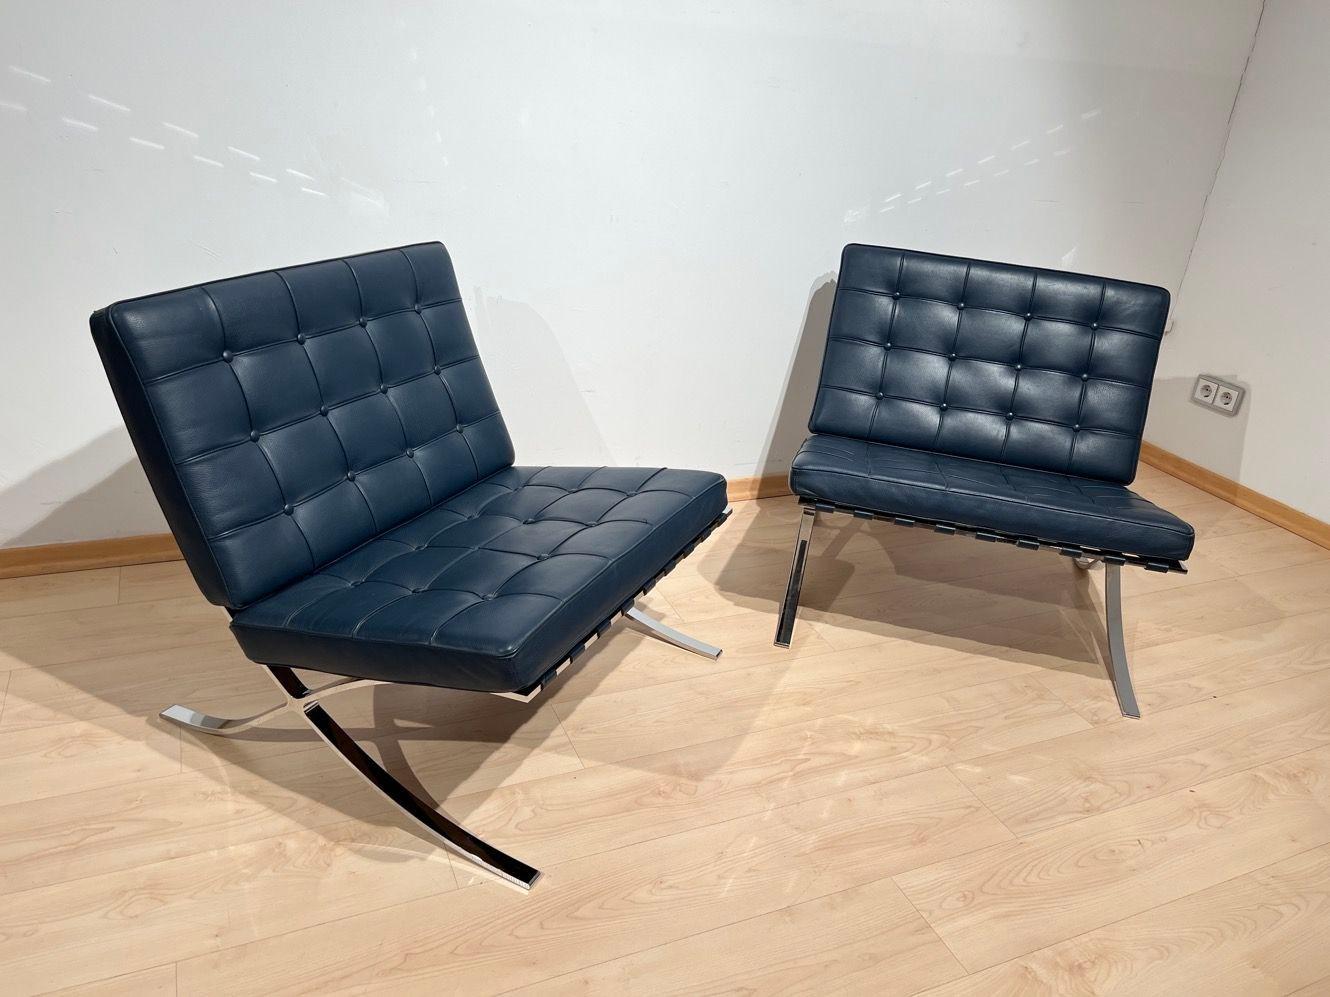 Pair of 1970s Barcelona Lounge Chairs by Mies van der Rohe in Blue Leather 2